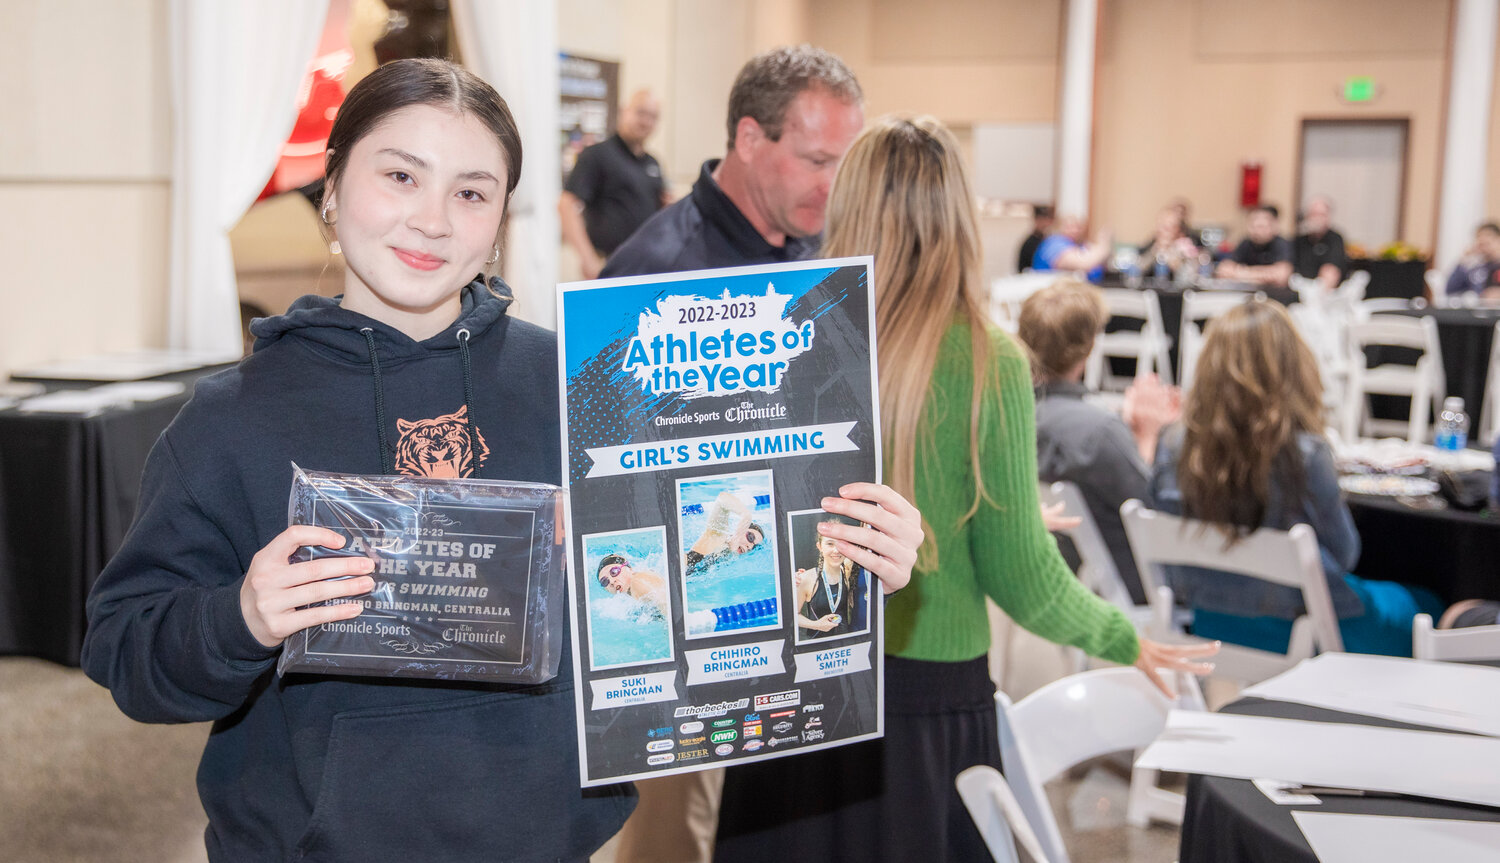 Centralia swimmer Chihiro Bringman smiles for a photo Tuesday evening during the “Athletes of the Year” banquet at the Jester Auto Museum. Bringman finished fourth at State for the 200 meter freestyle and fifth for the 500 meter freestyle after winning a pair of events at the district championships in Shelton.